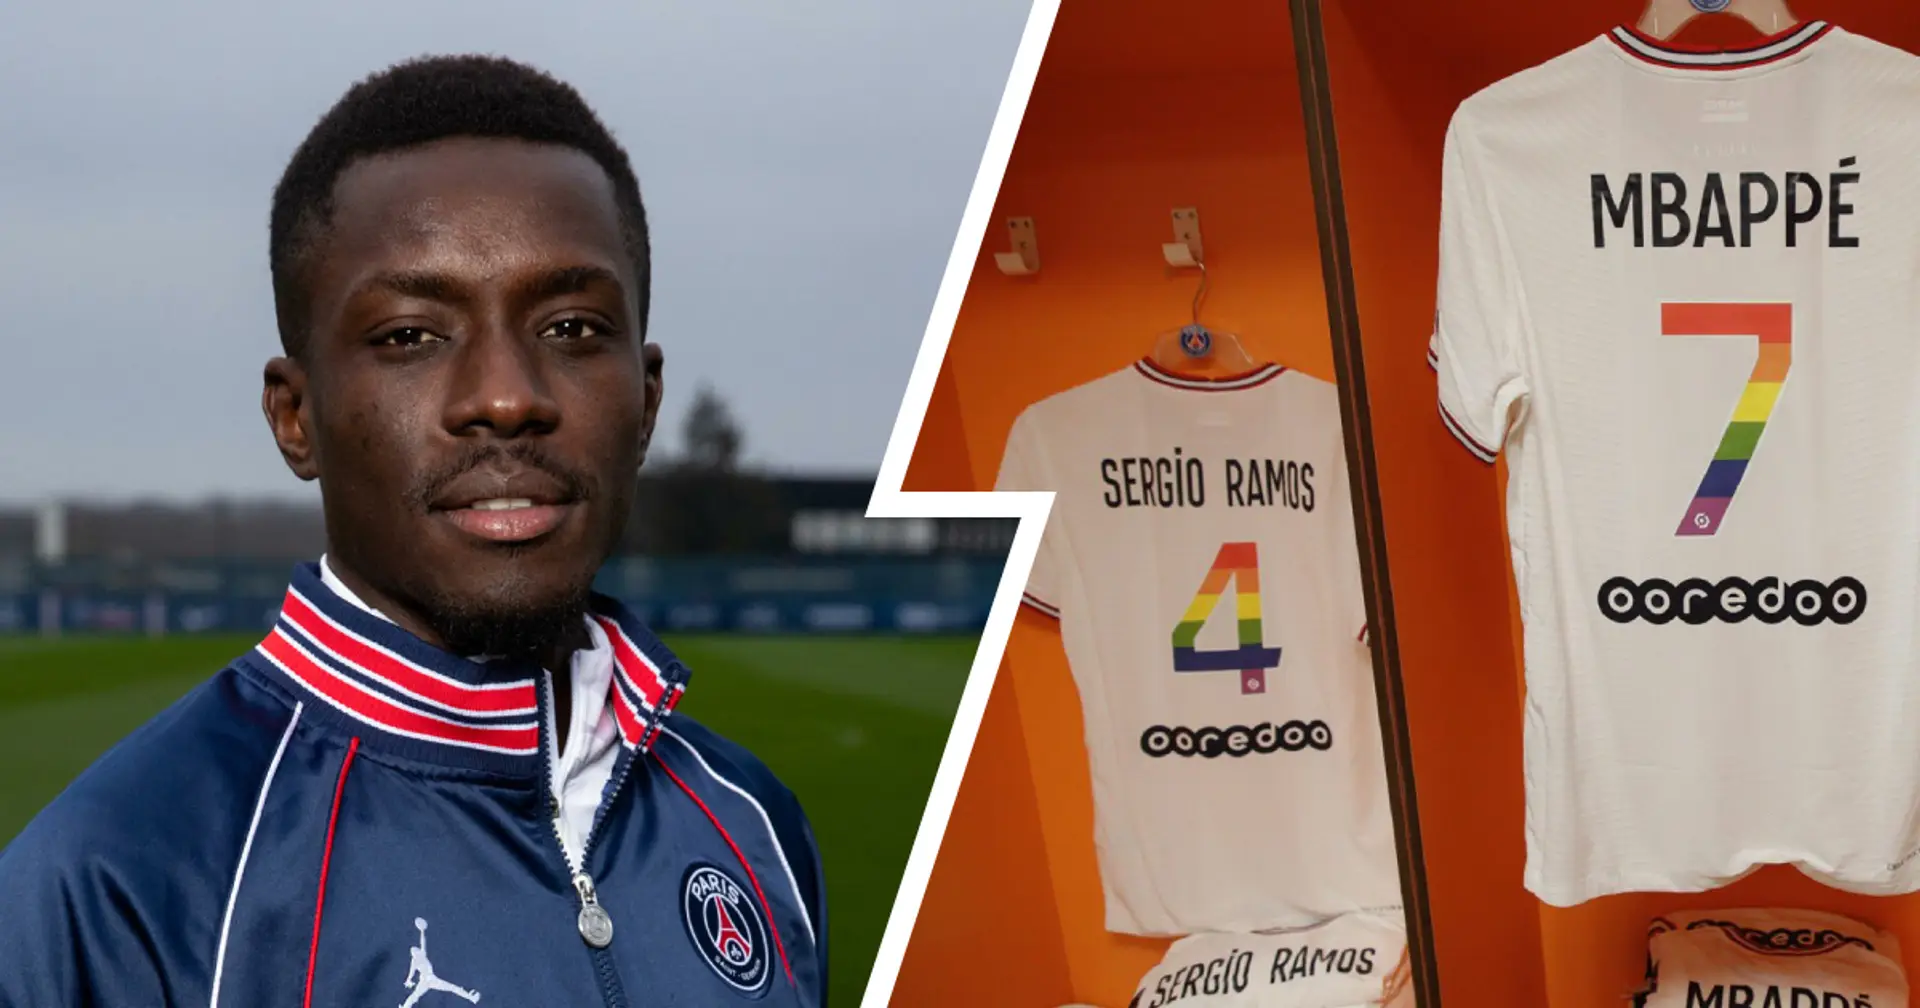 PSG's Idrissa Gueye 'perceived as a hero in Senegal' after refusing to wear rainbow shirt